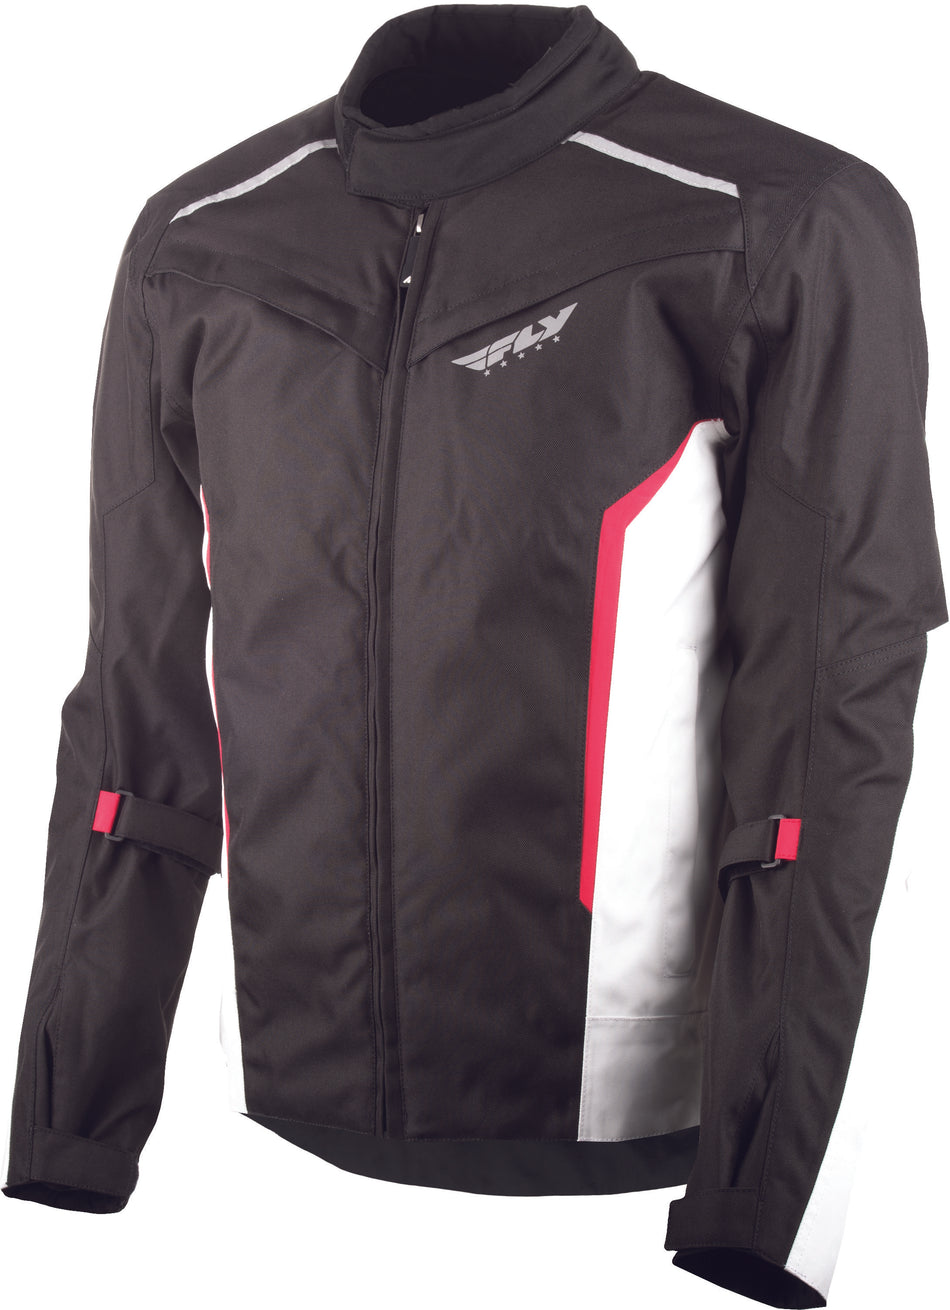 FLY RACING Baseline Jacket Black/White/Red Md #5958 477-2091~3